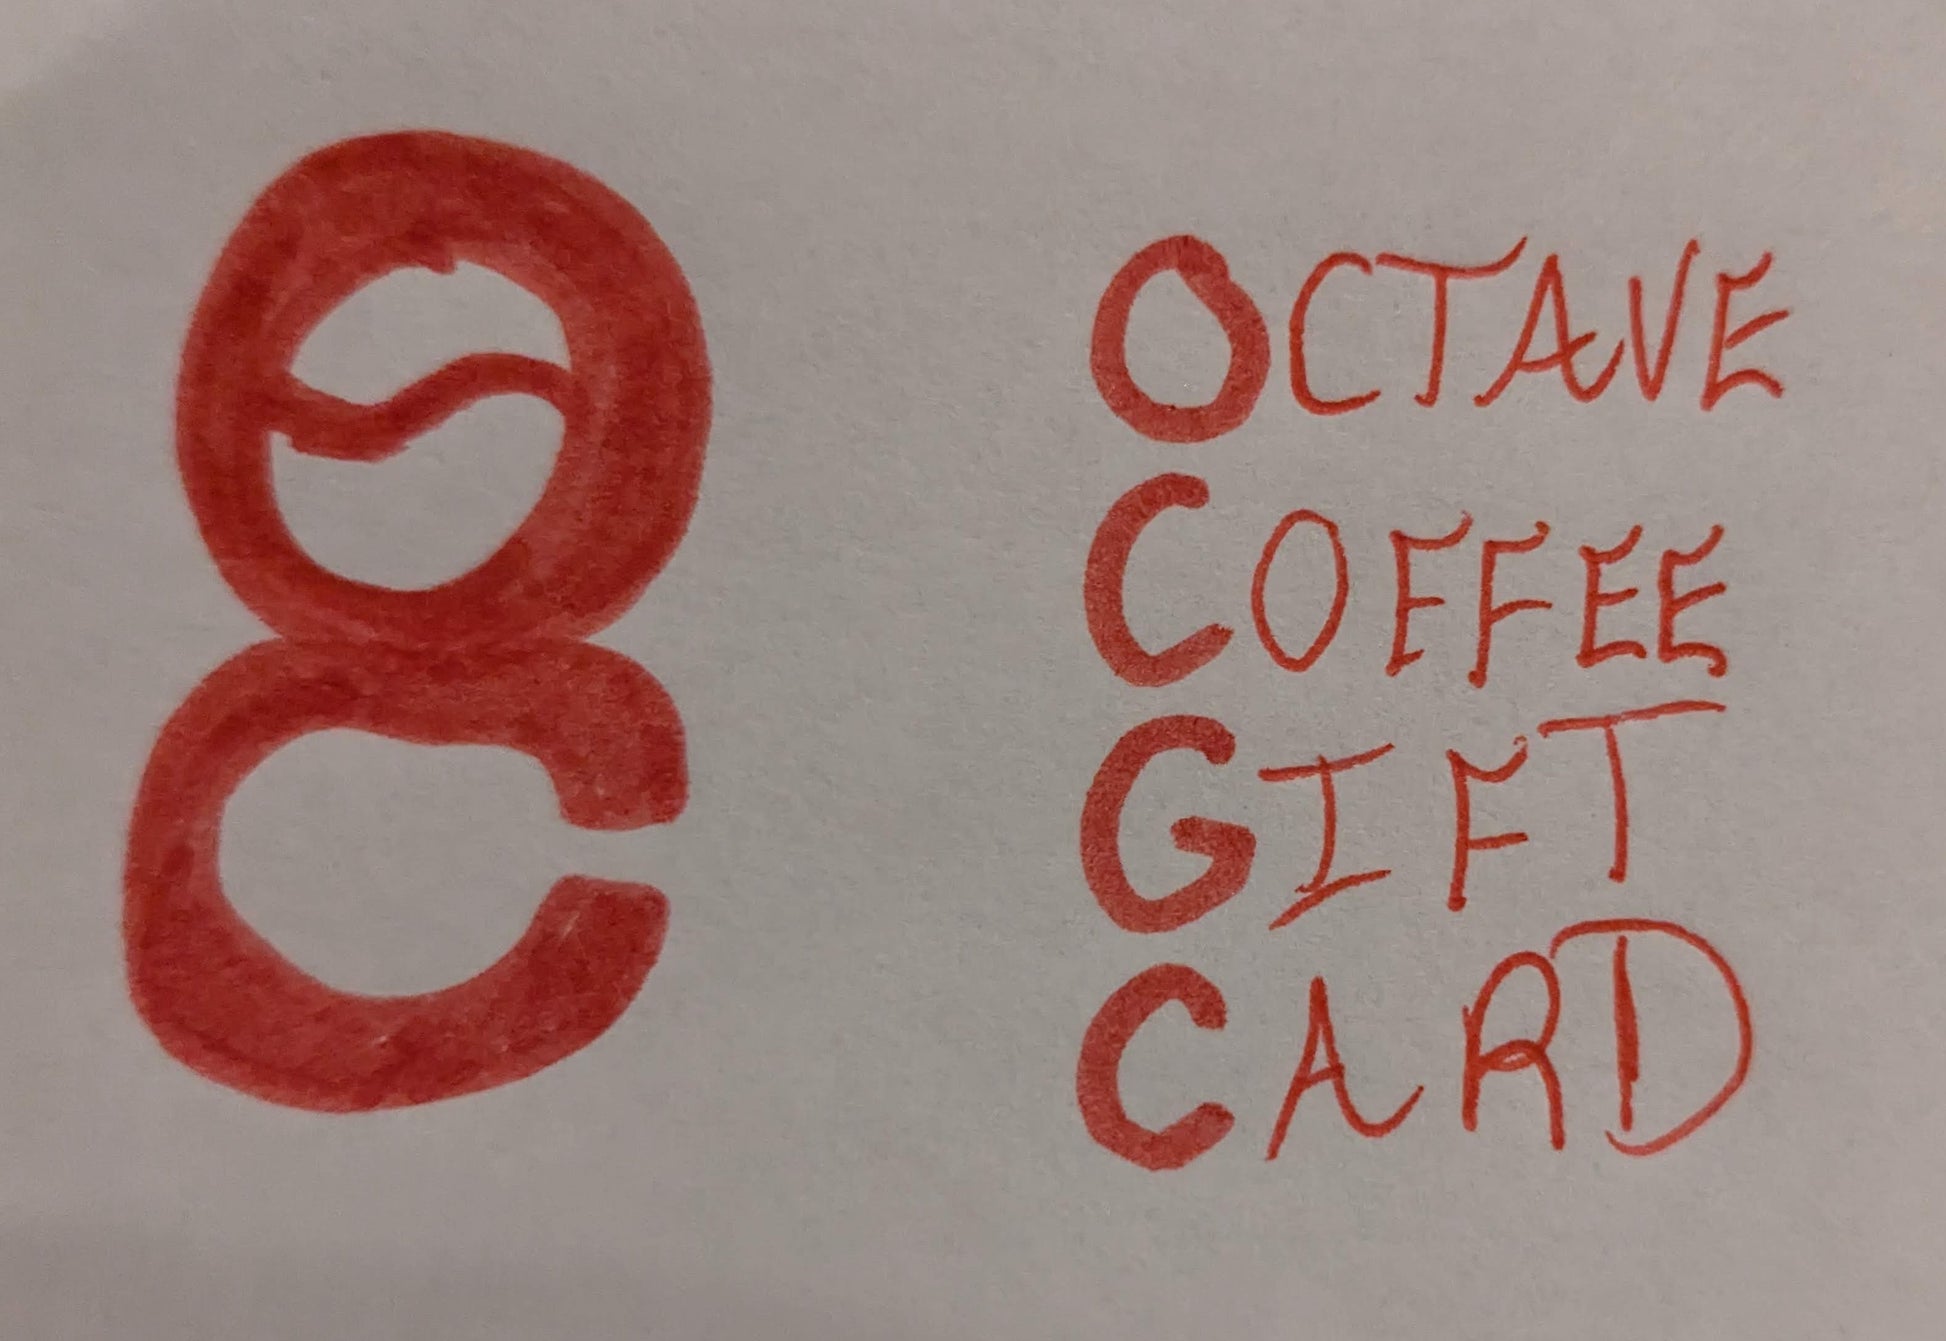 Octave Coffee Gift Card - Octave Coffee Co.